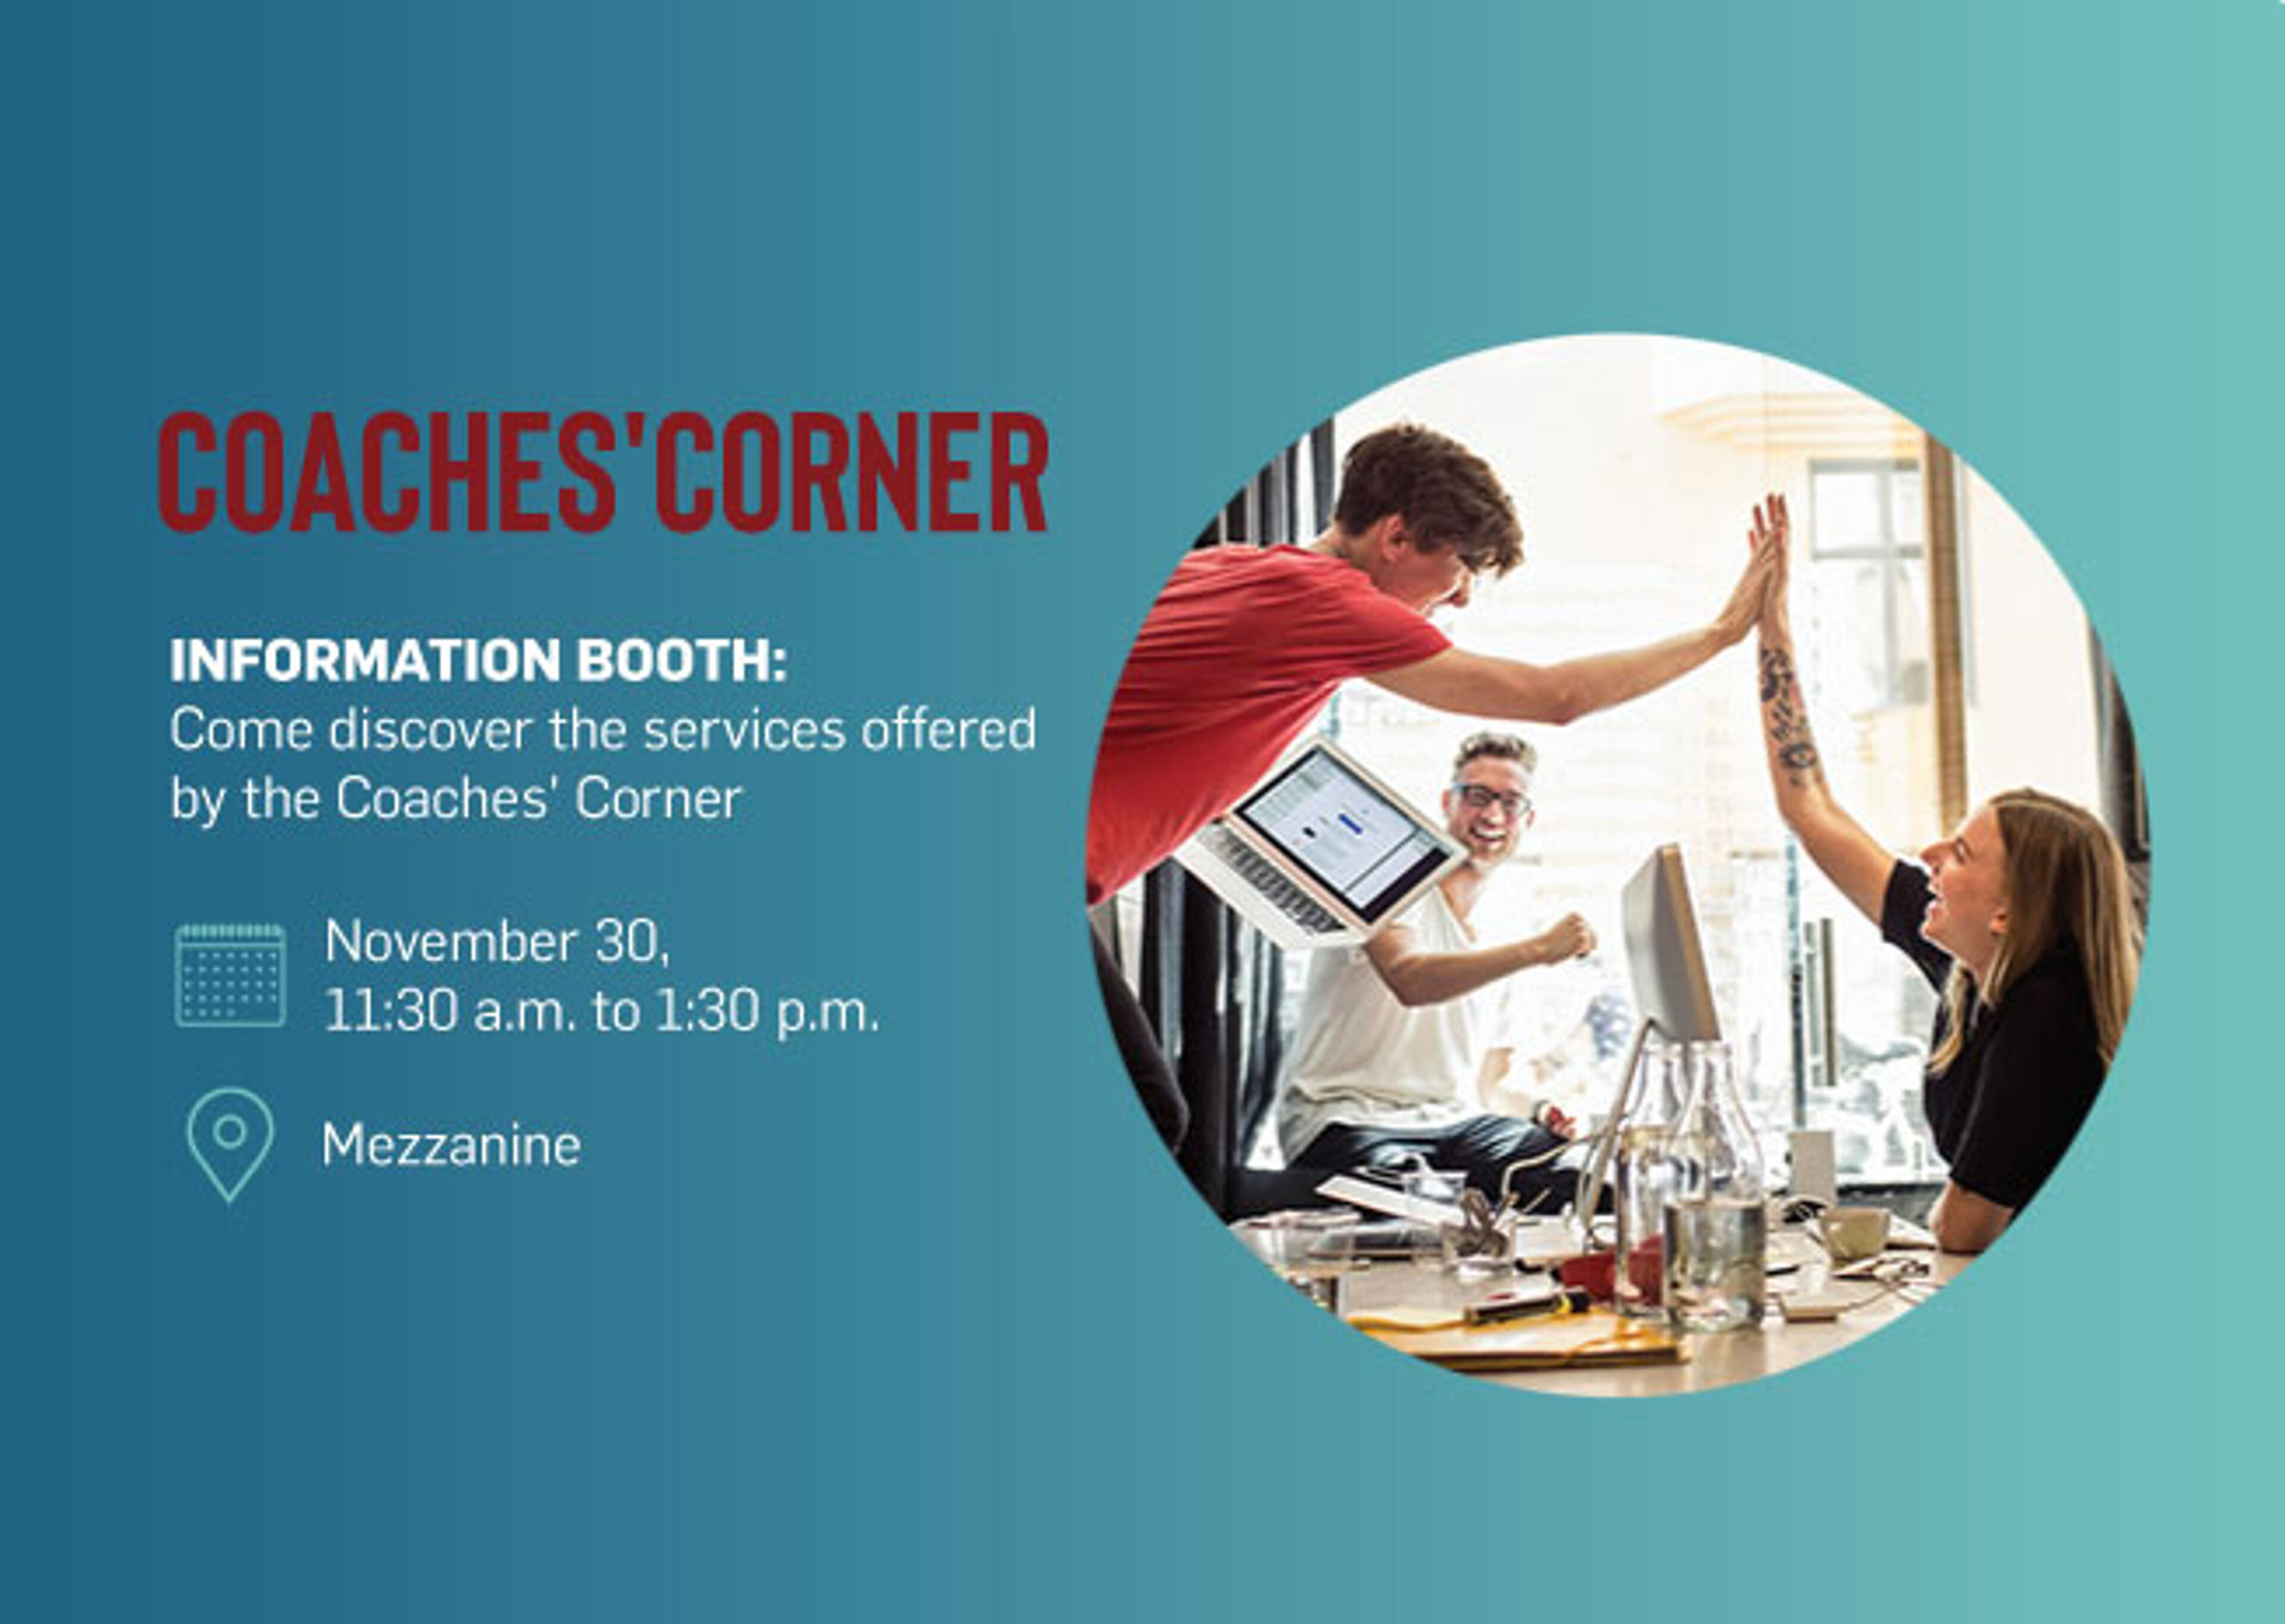 Promotional image for Coaches' Corner, showing a team high-fiving, with an info session scheduled for November 30, 11:30 a.m. to 1:30 p.m. at the Mezzanine.